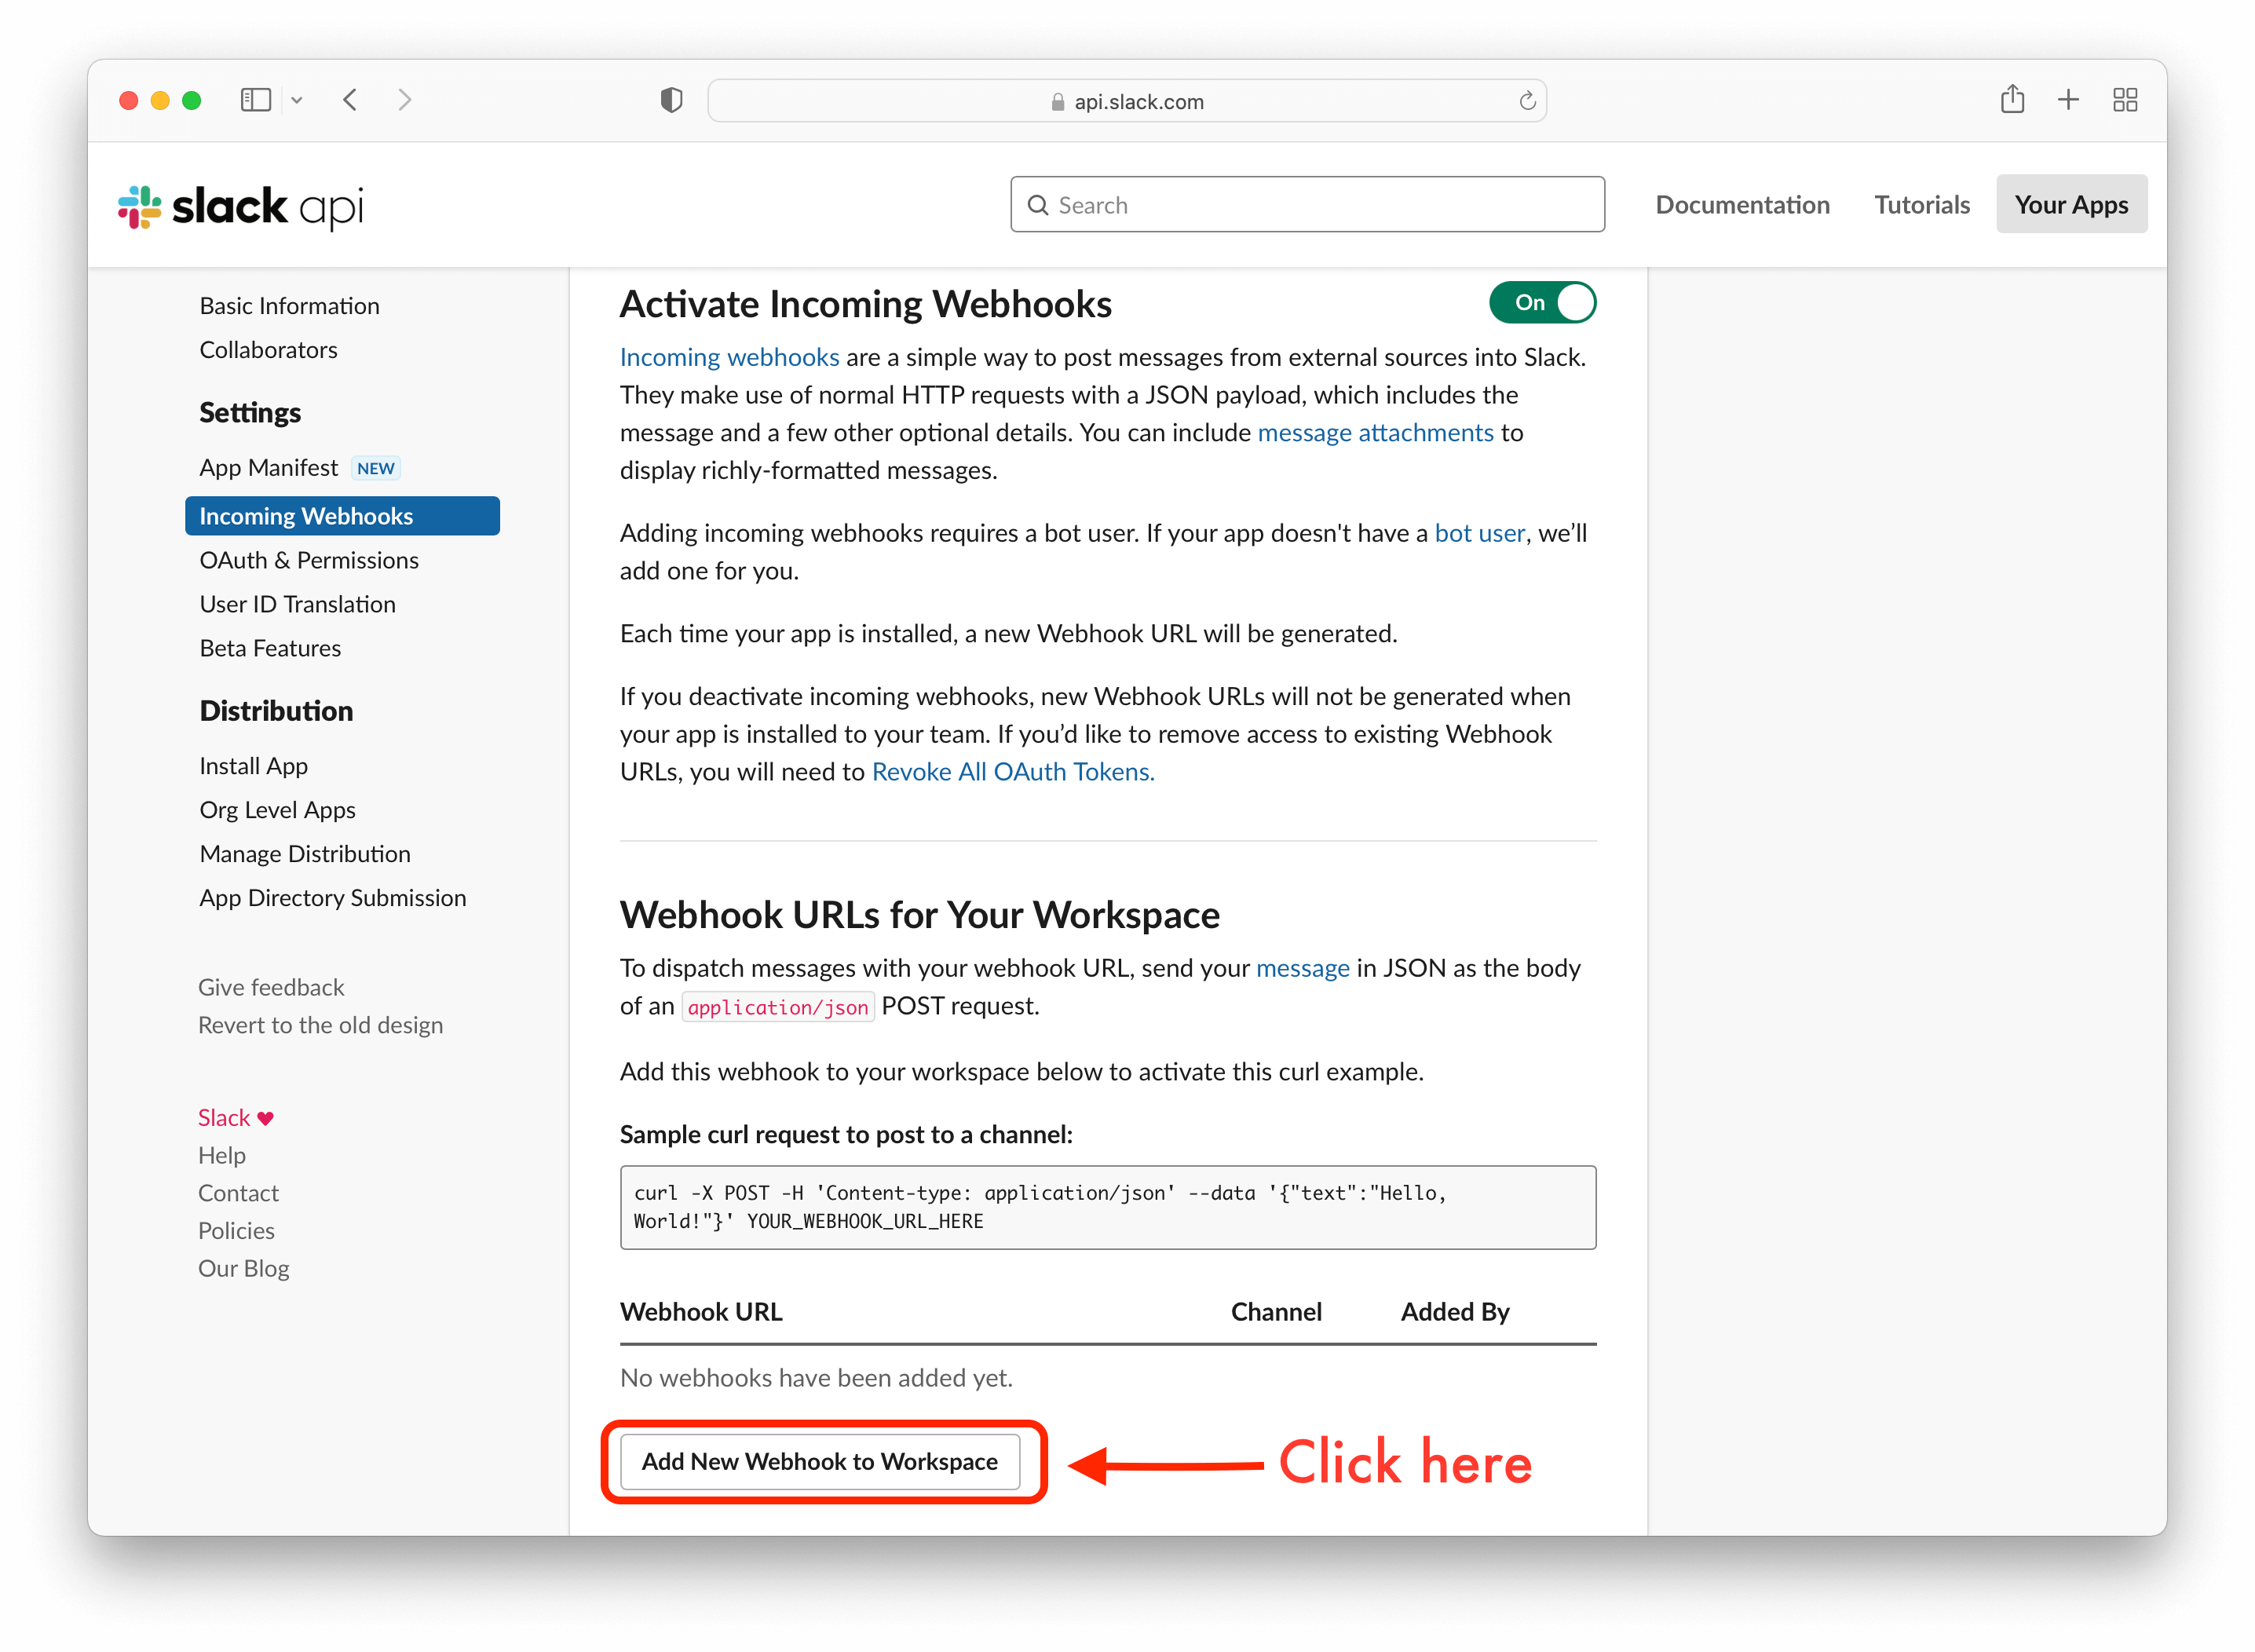 Slack Add New Webhook to Workspace section